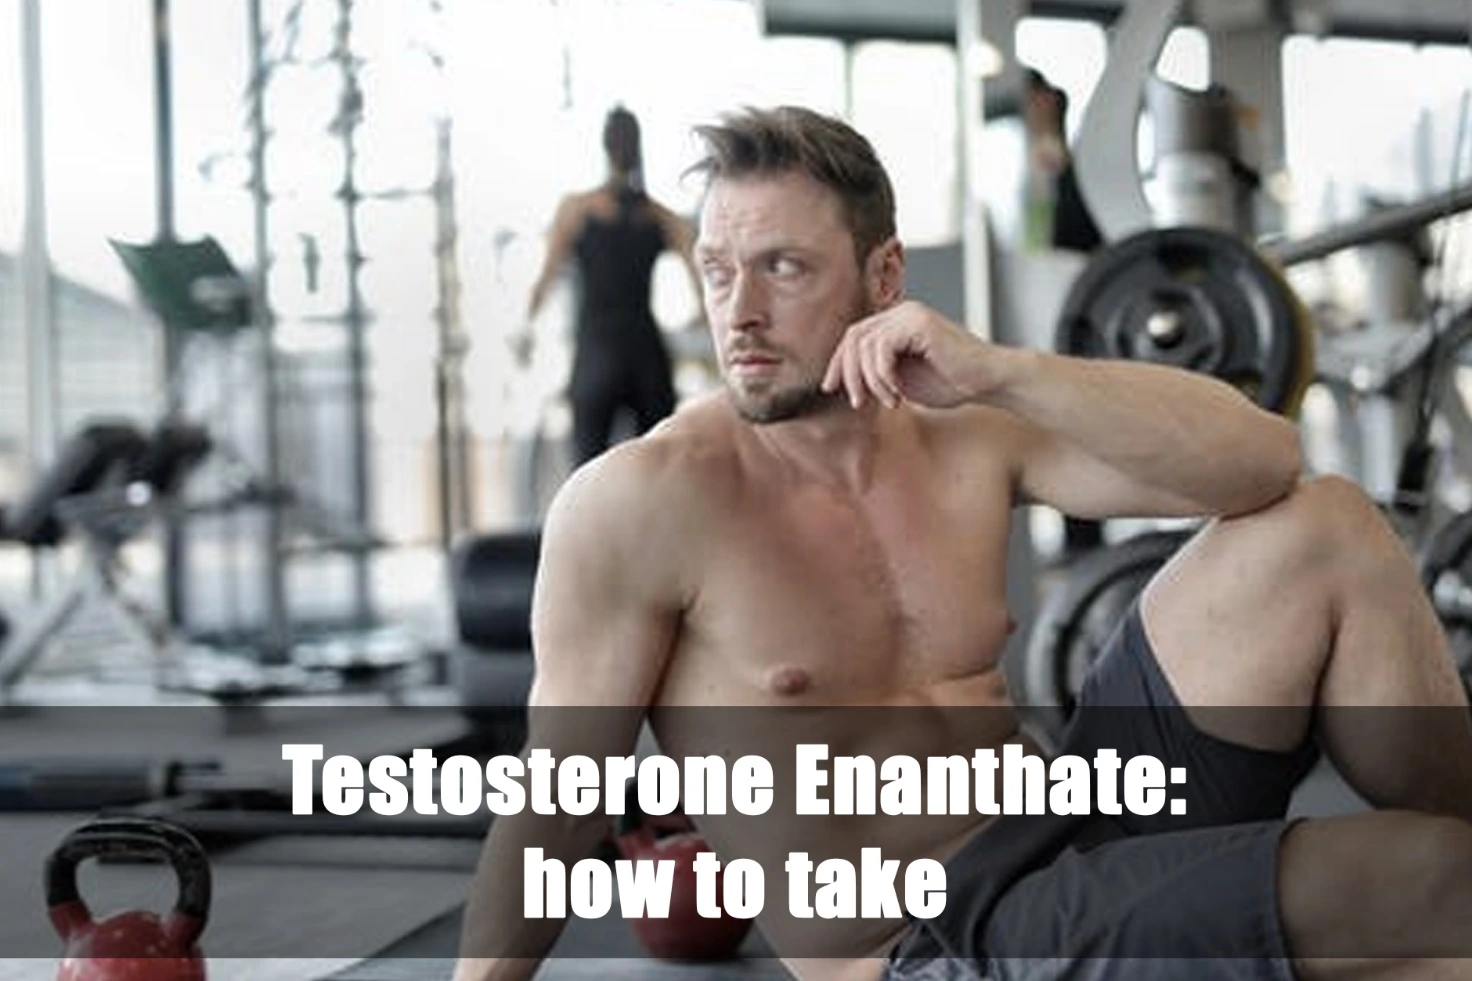 Come prendere Testosterone Enanthate